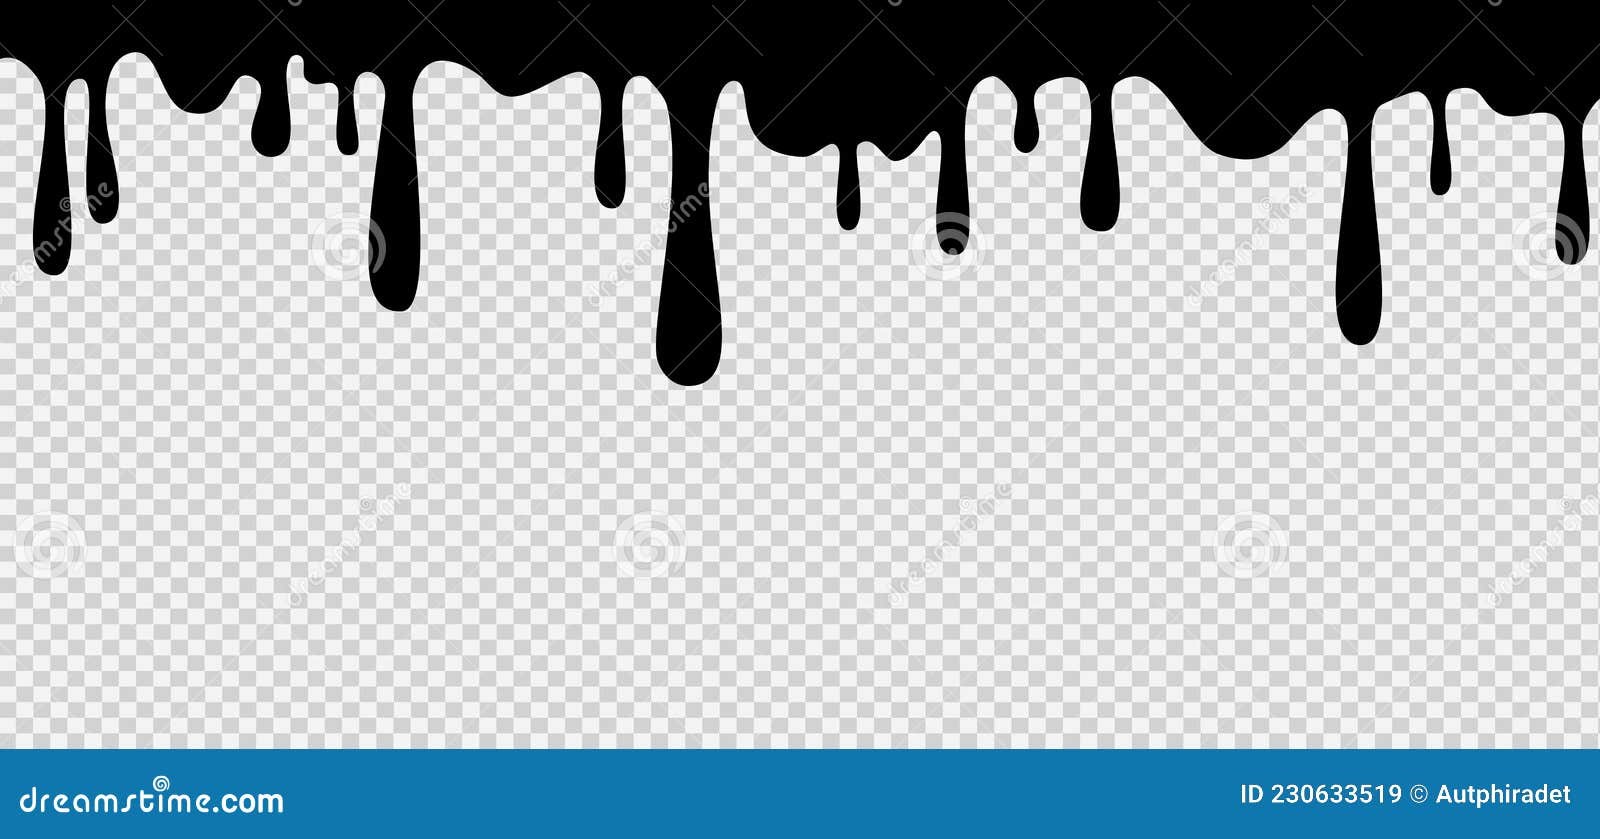 Halloween Party Background with Black Slime Flow Form Top Isolated Png or  Transparent Texture,blank Space for Text,element Stock Vector -  Illustration of online, advertising: 230633519